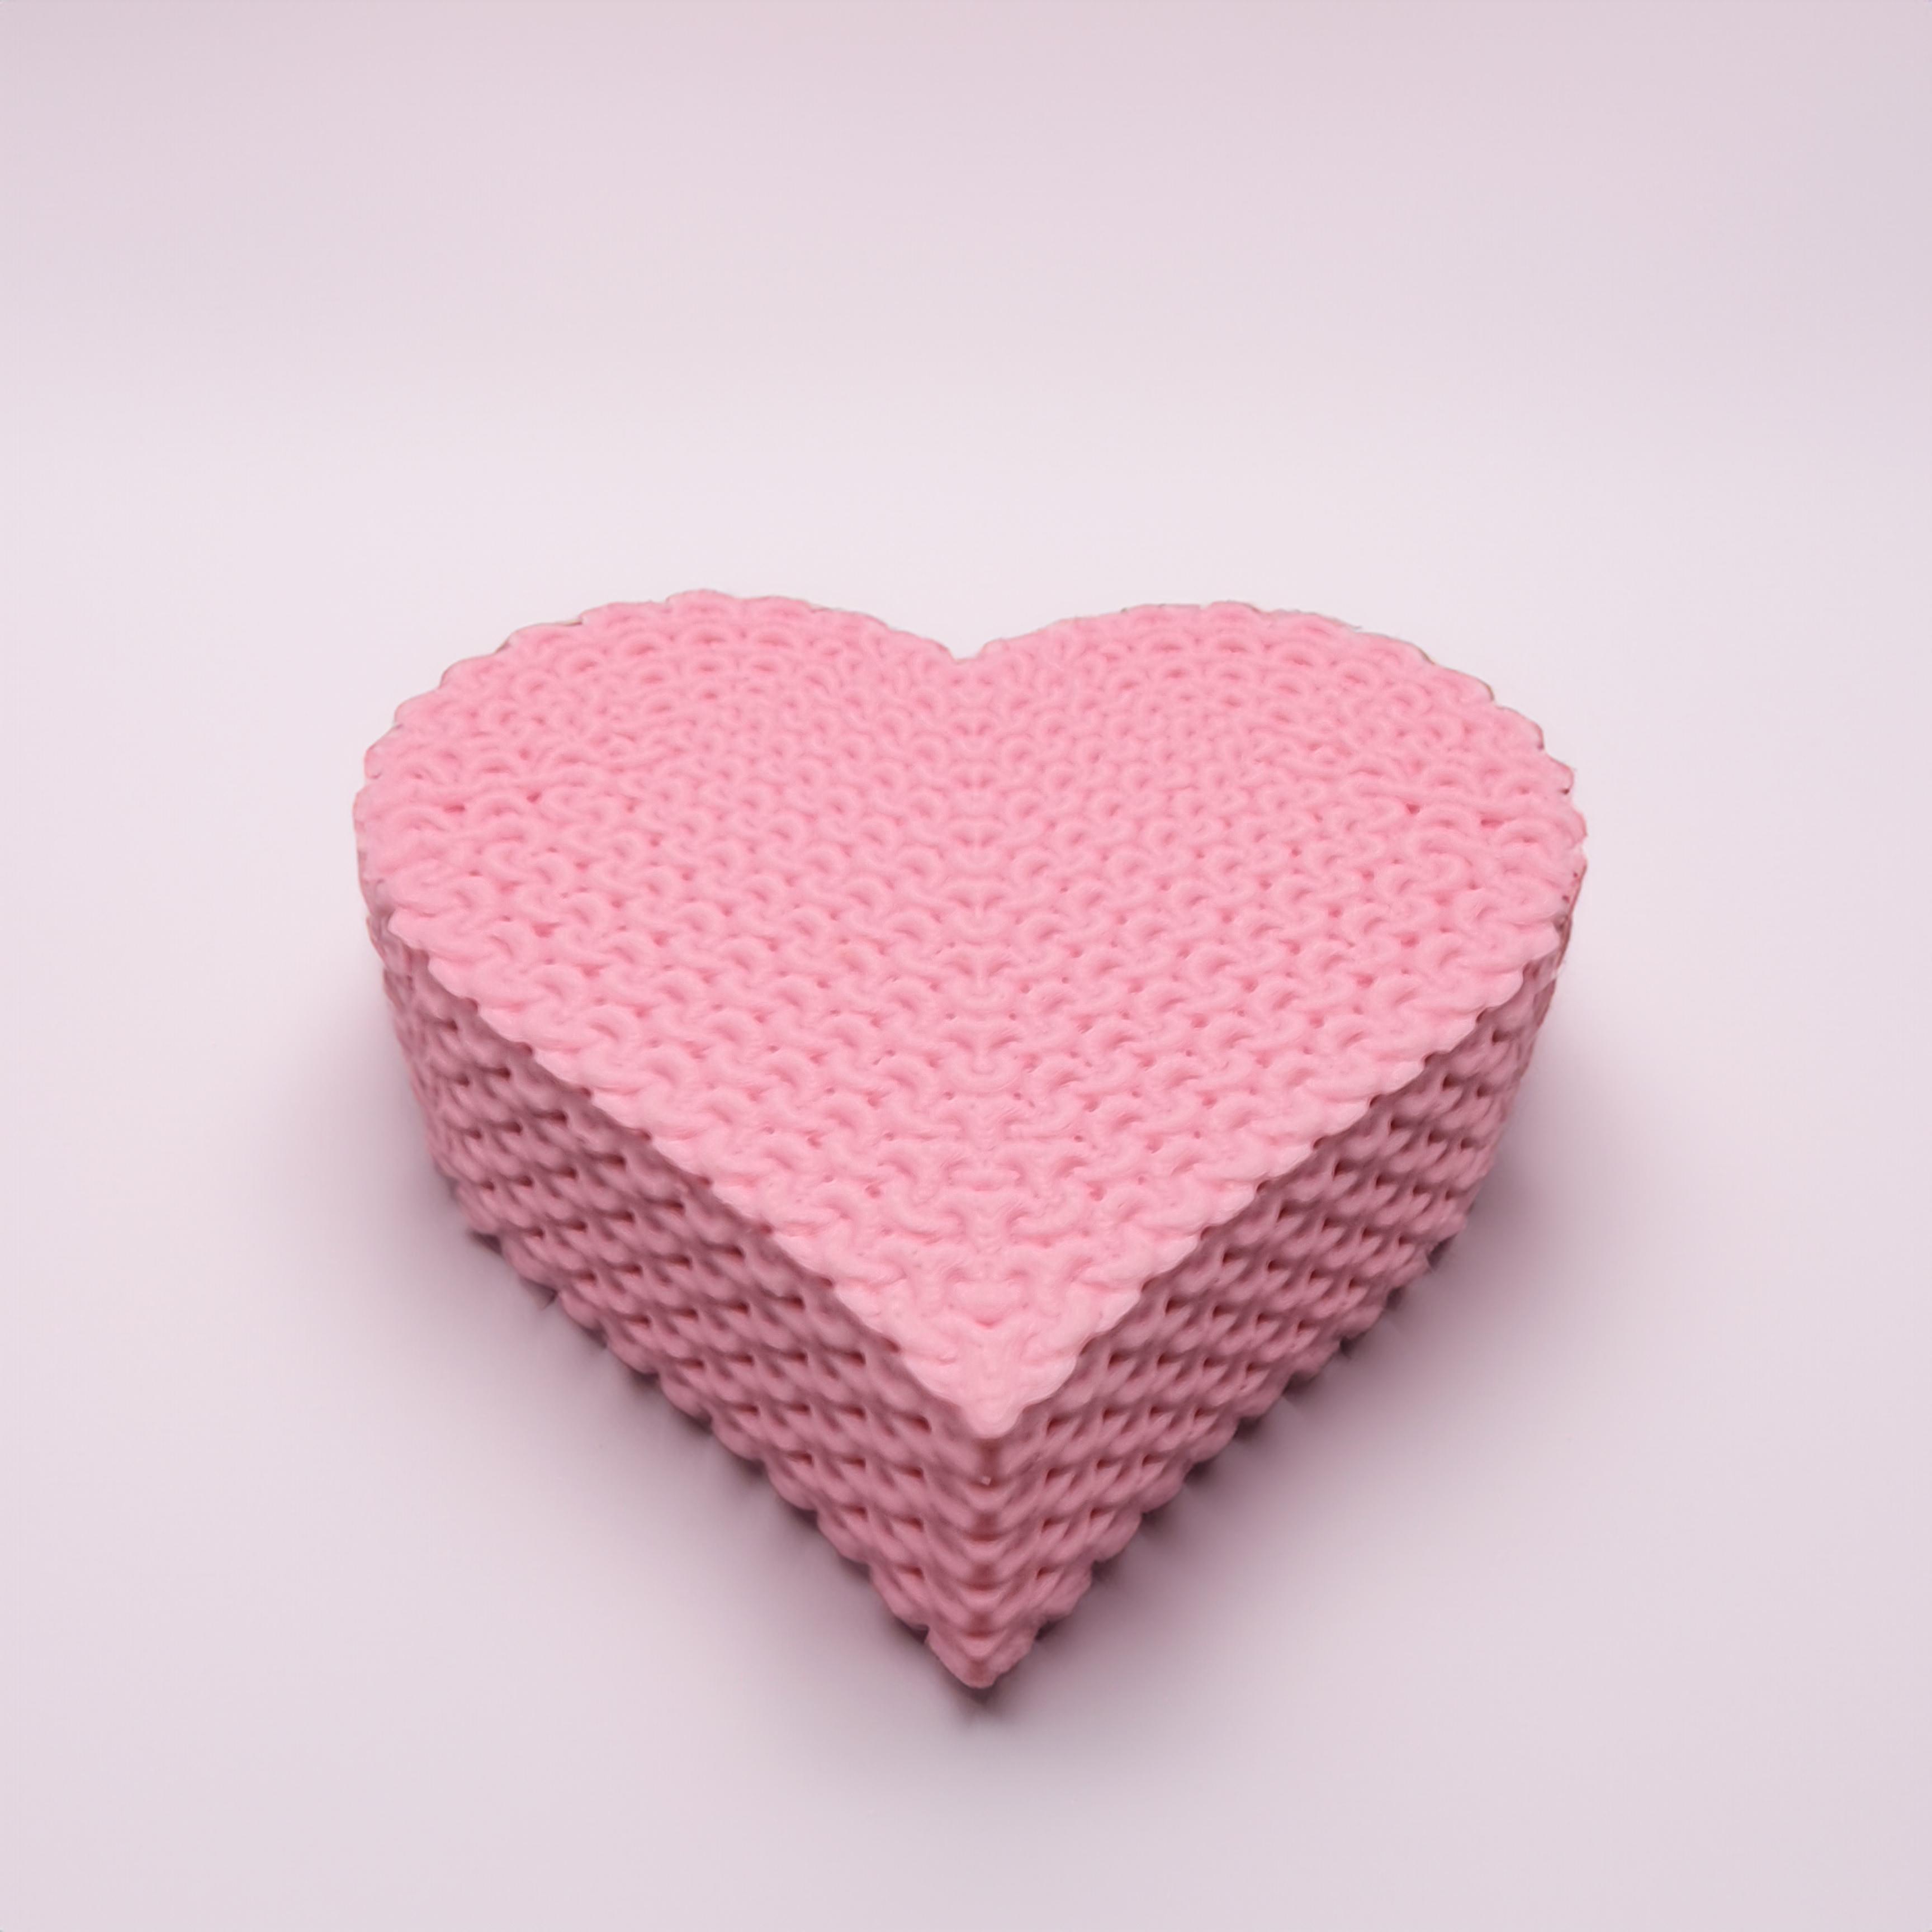 HEART KNITTED CROCHET CONTAINER VALENTINES STORAGE 3d model